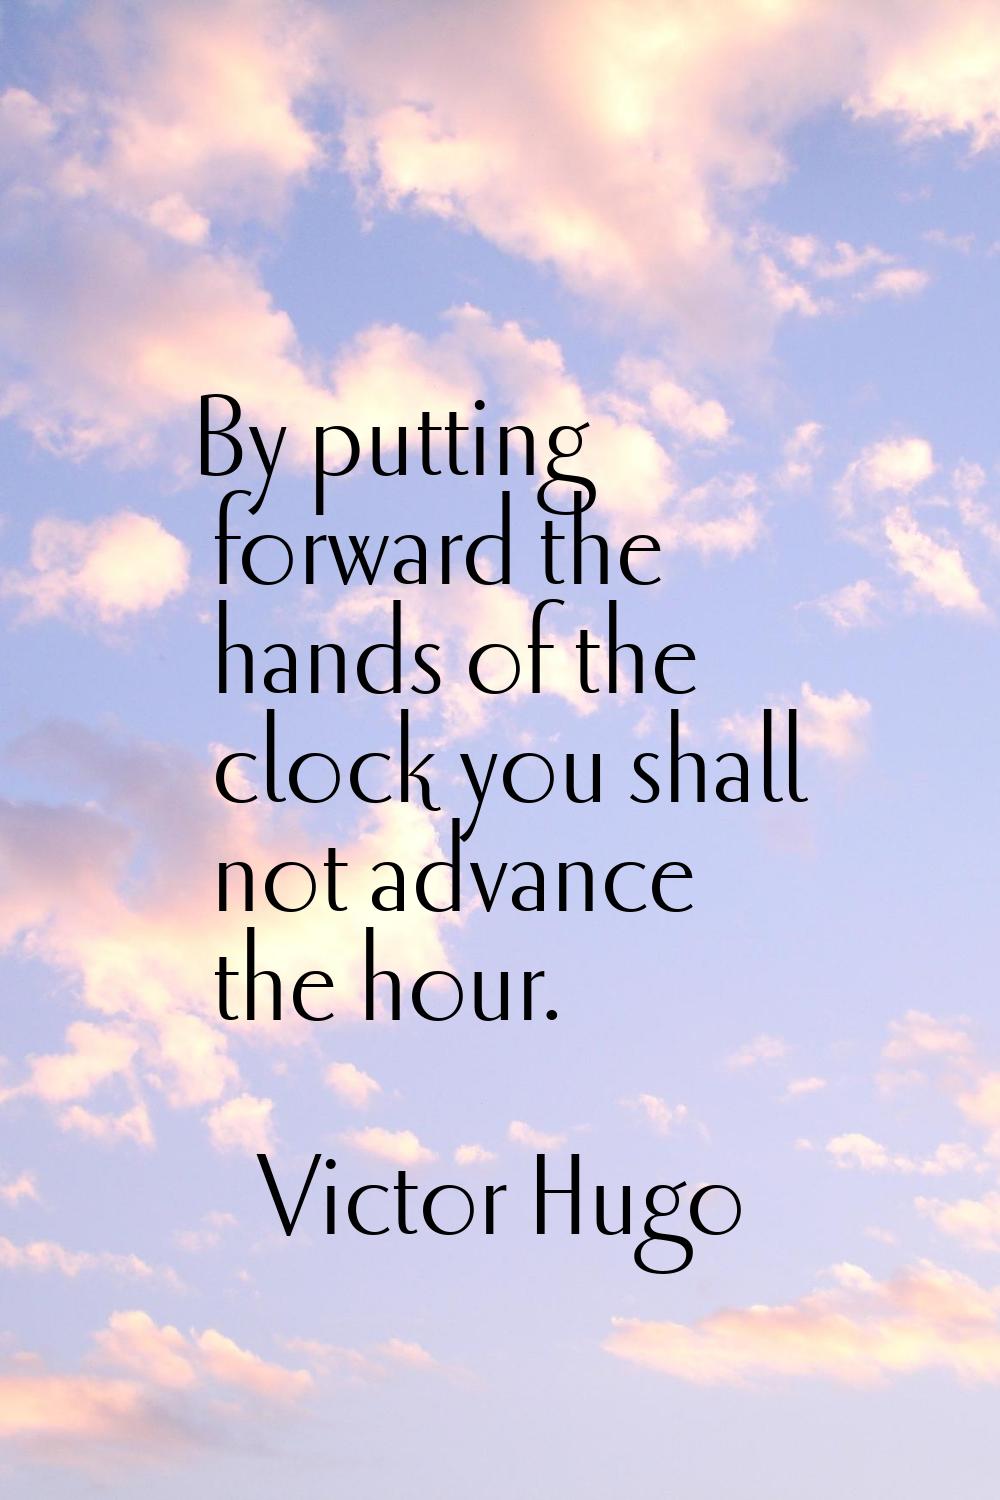 By putting forward the hands of the clock you shall not advance the hour.